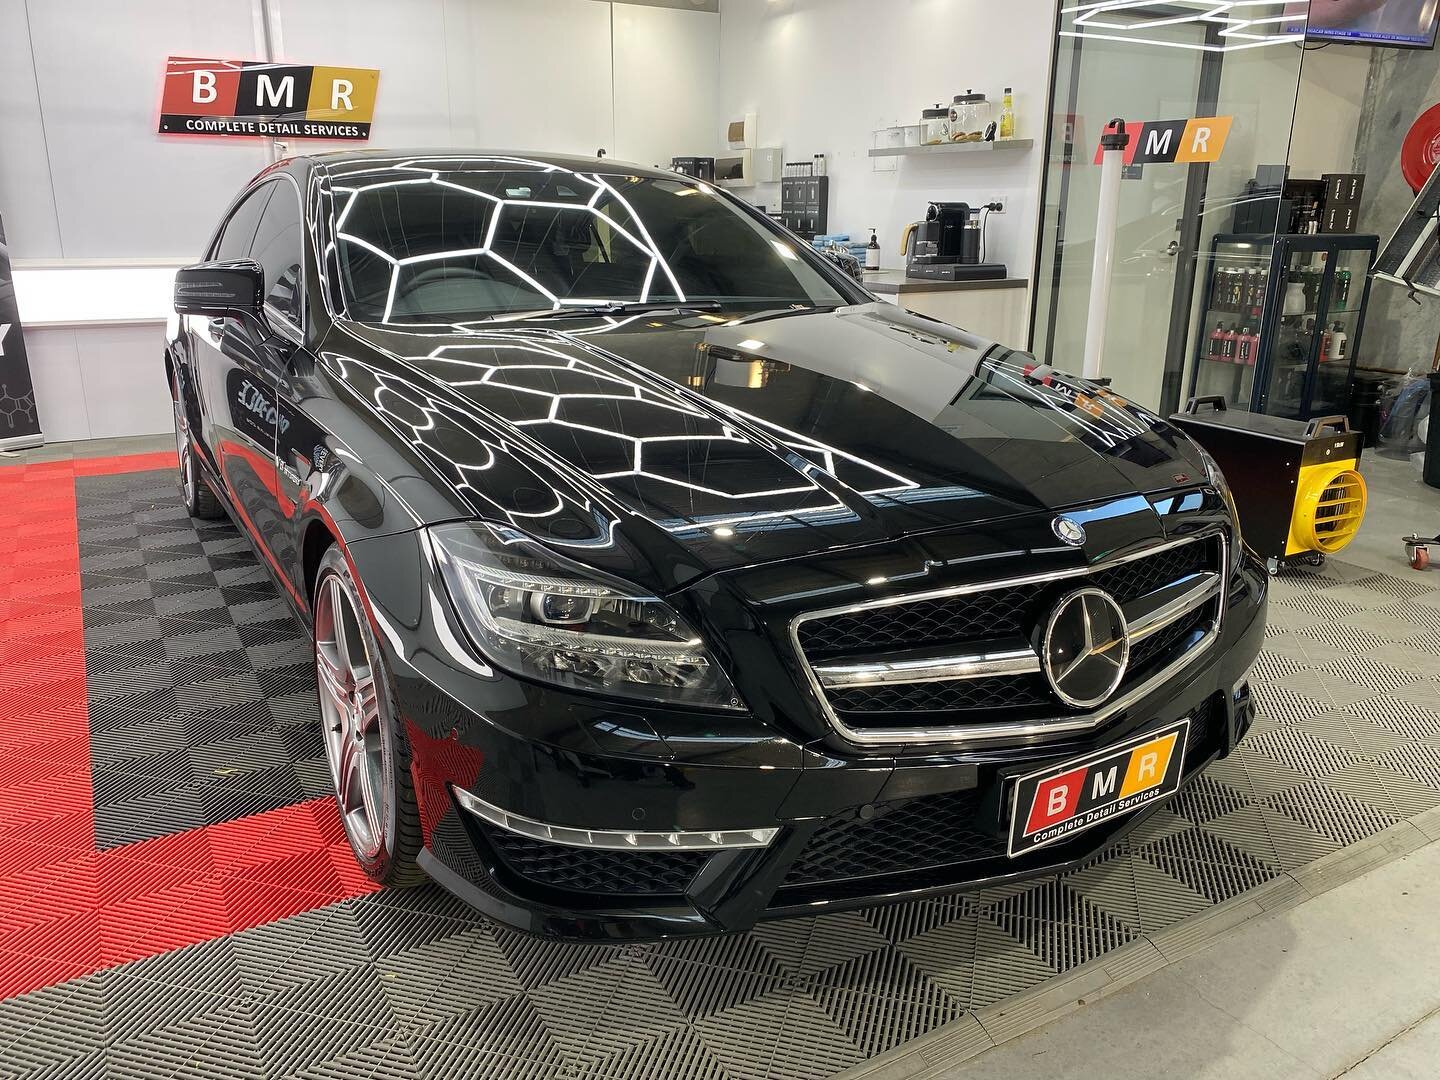 Mercedes CLS 63 in for complete overhaul of paint and interior. This one needed a 2 stage correction to remove the heavy swirling and bird etching. Interior got a deep clean to remove years of dirt build up on leather. We laid down our Graphene coati